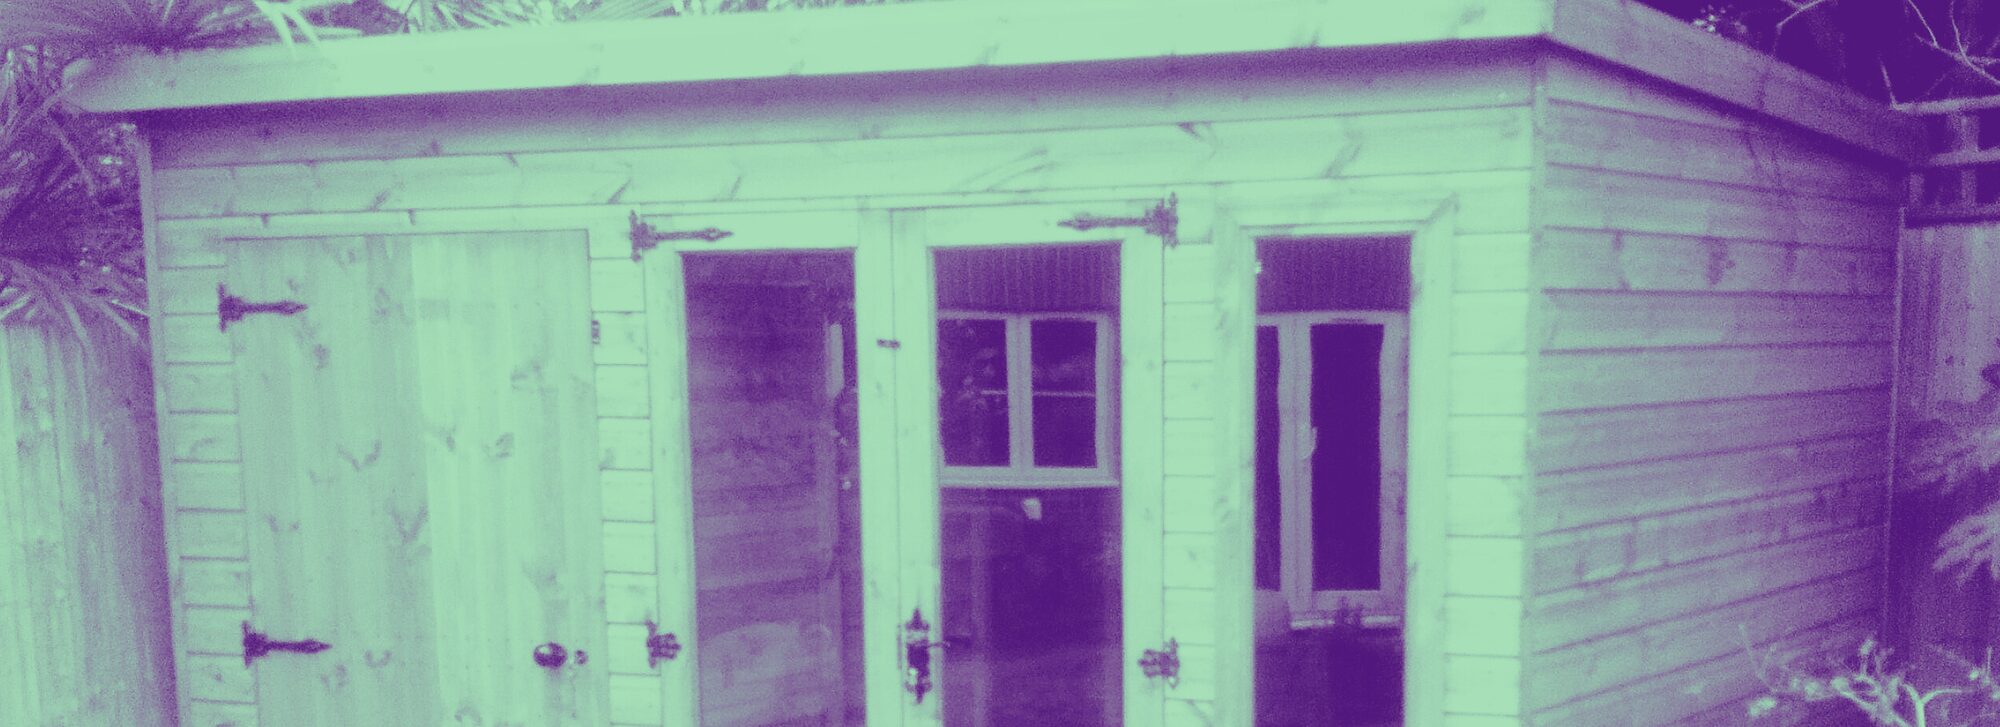 A heavily filtered photo of a wooden studio workshop with glass windows and doors.